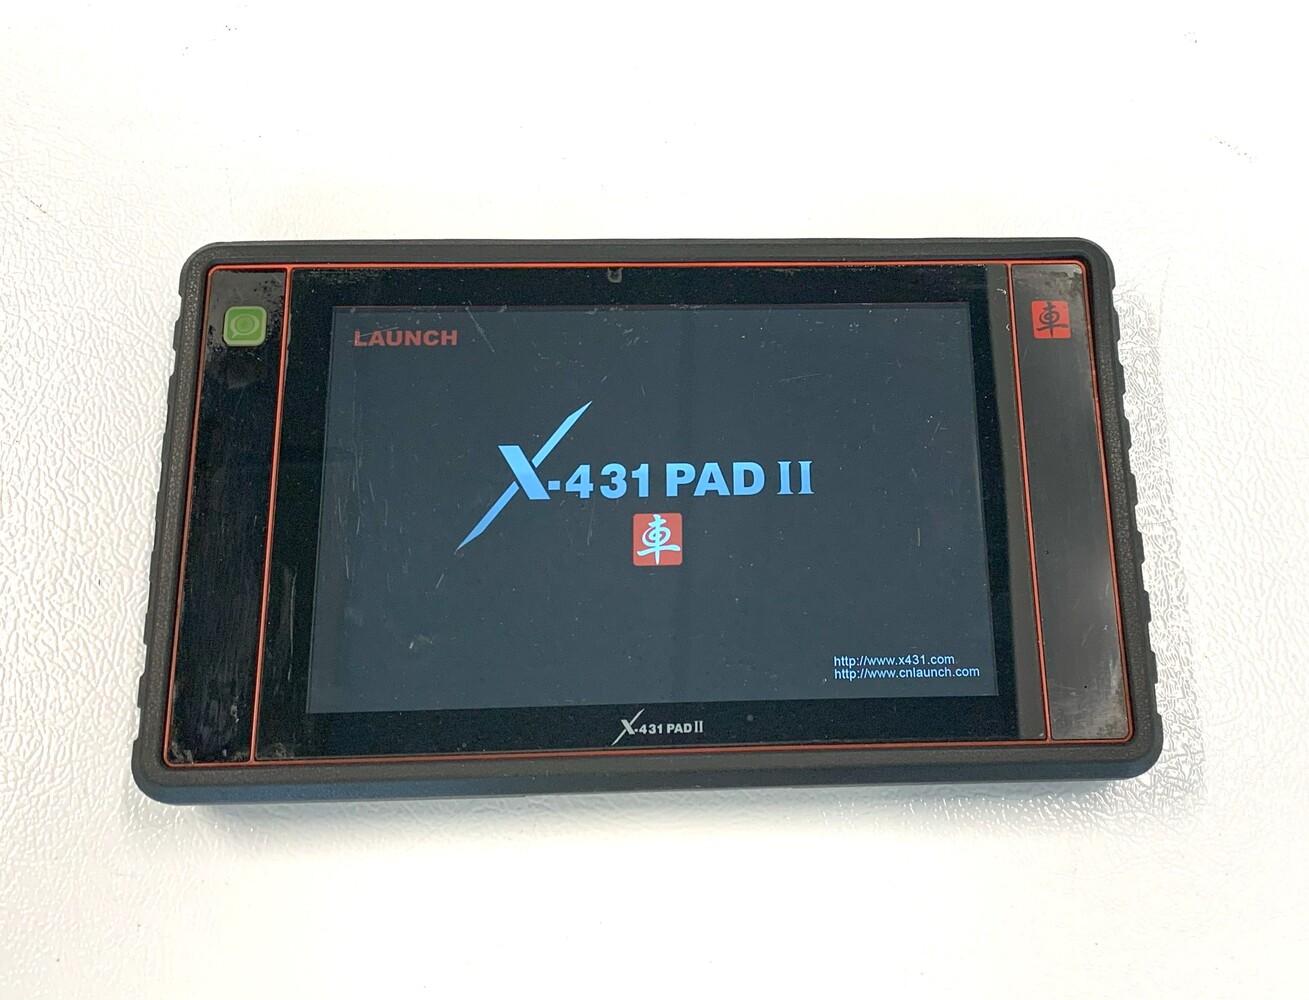 Launch X.431 Pad II Version V3.11.015 with Charger 